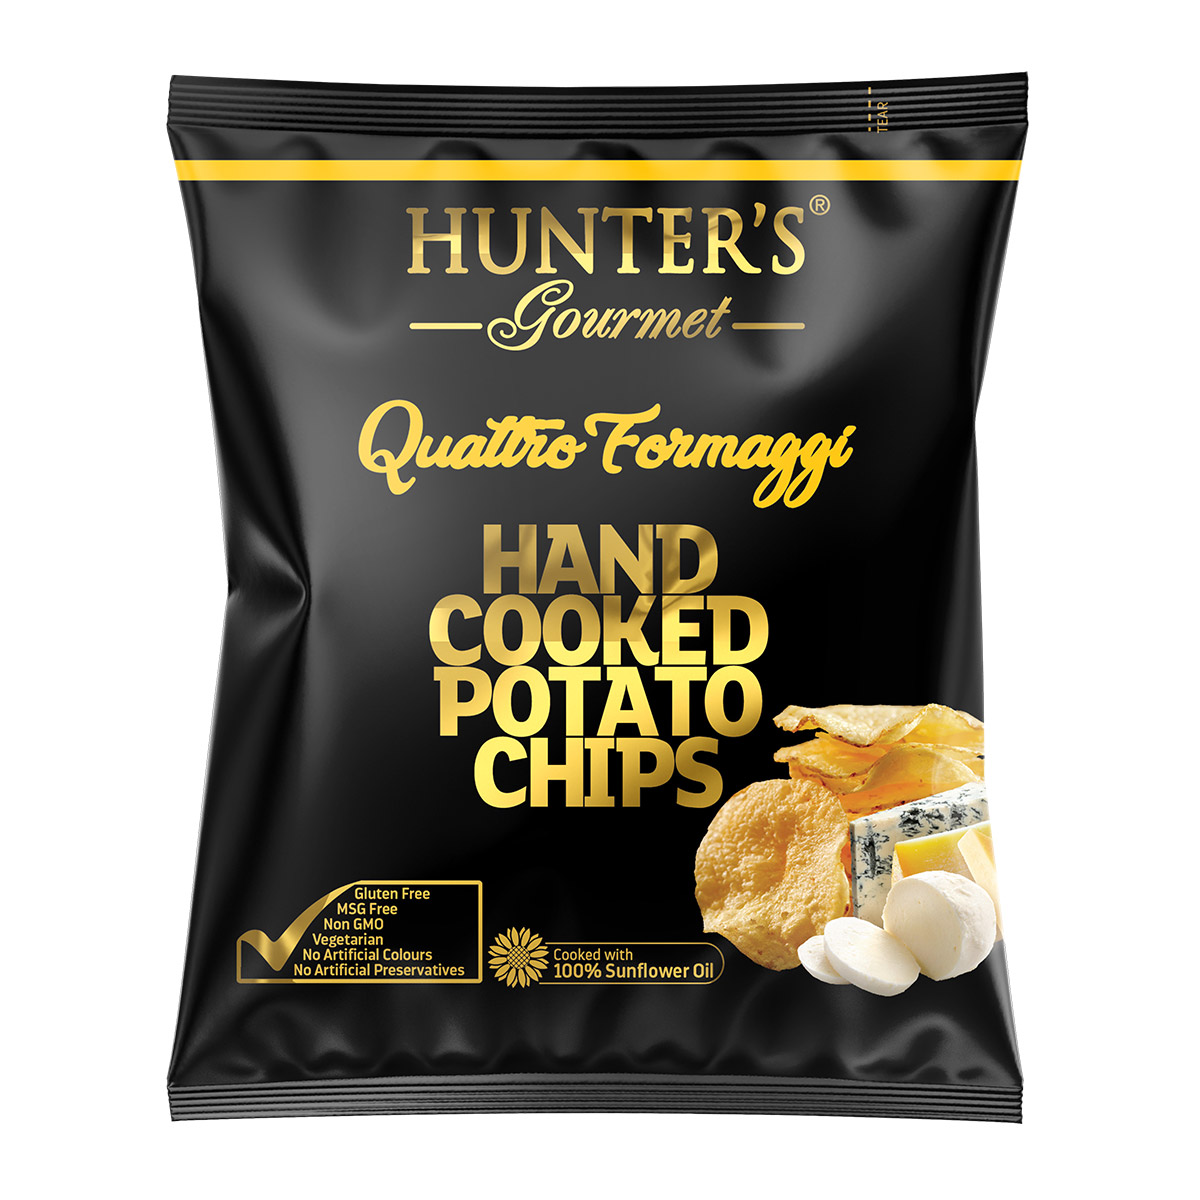 Hunter’s Gourmet Hand Cooked Potato Chips – Quattro Formaggi – Gold Edition (150gm)